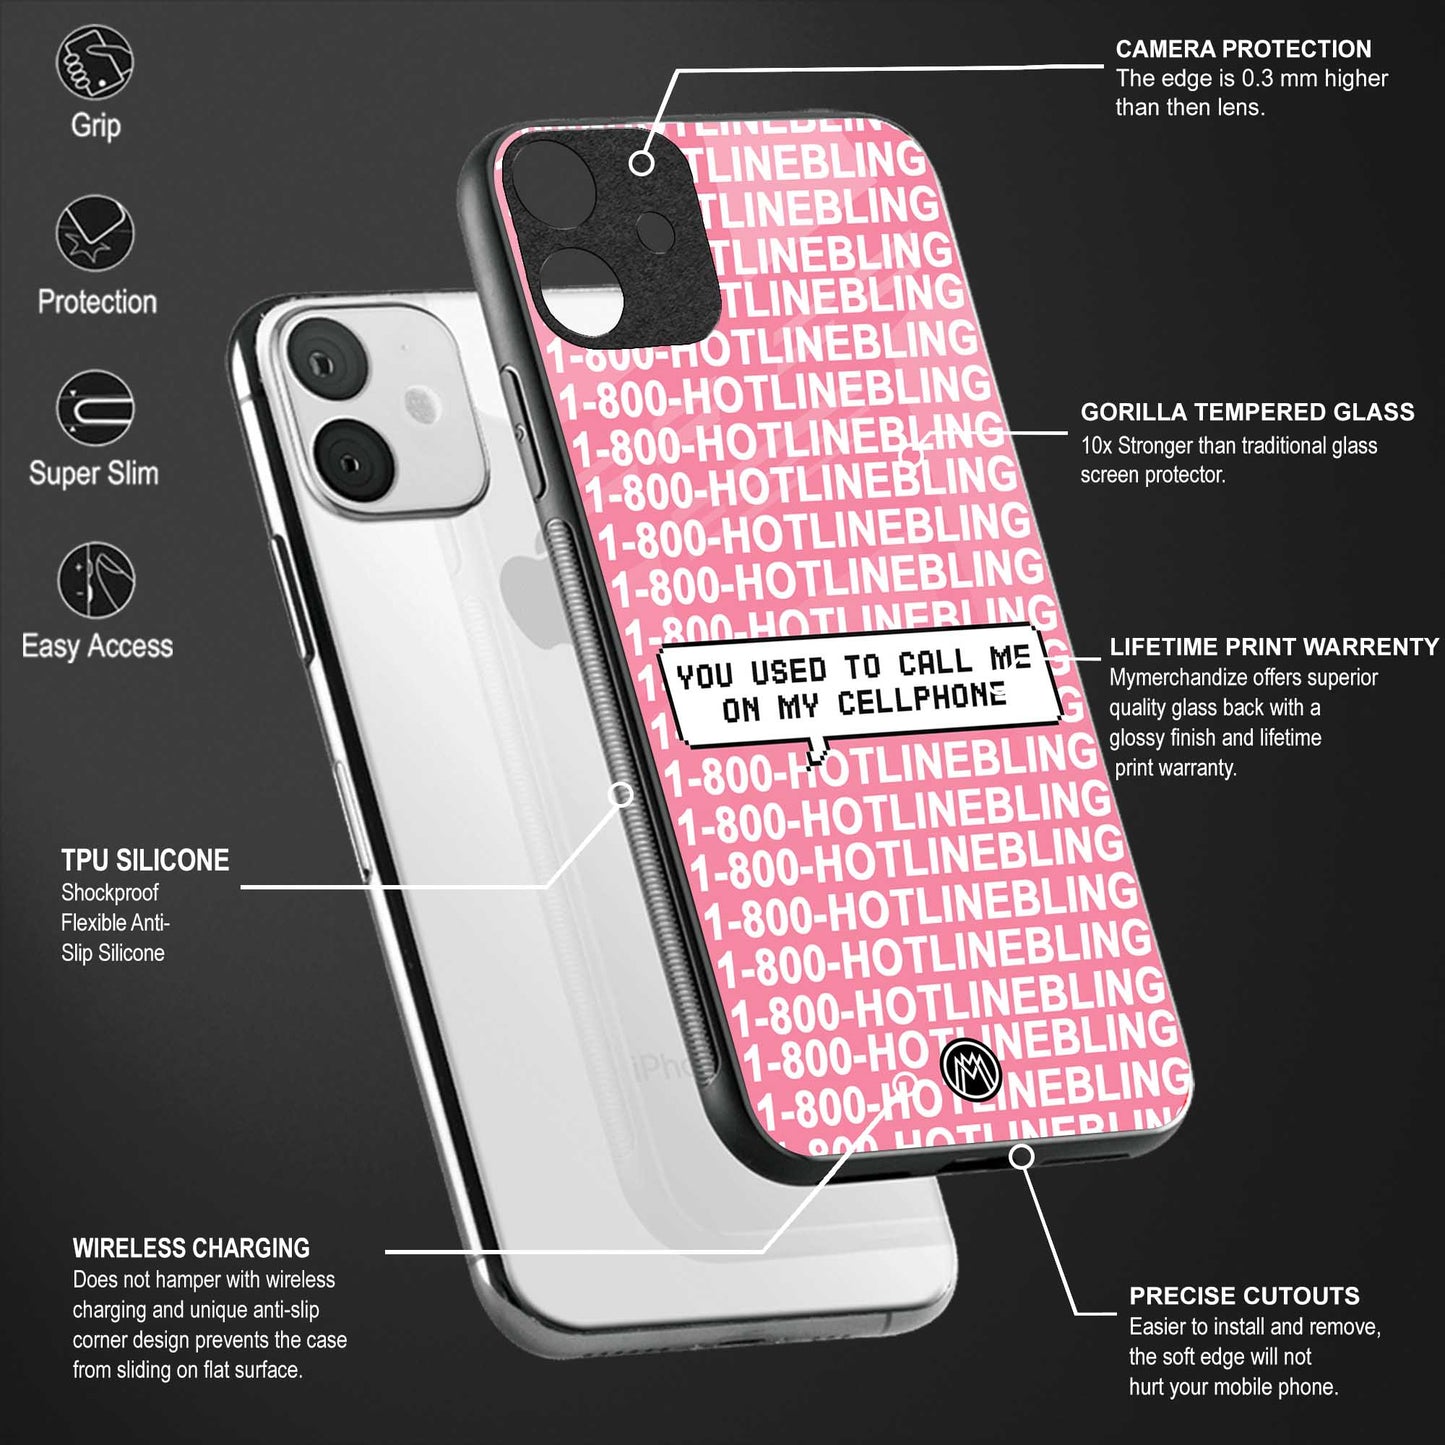 1800 hotline bling phone cover for realme 3 